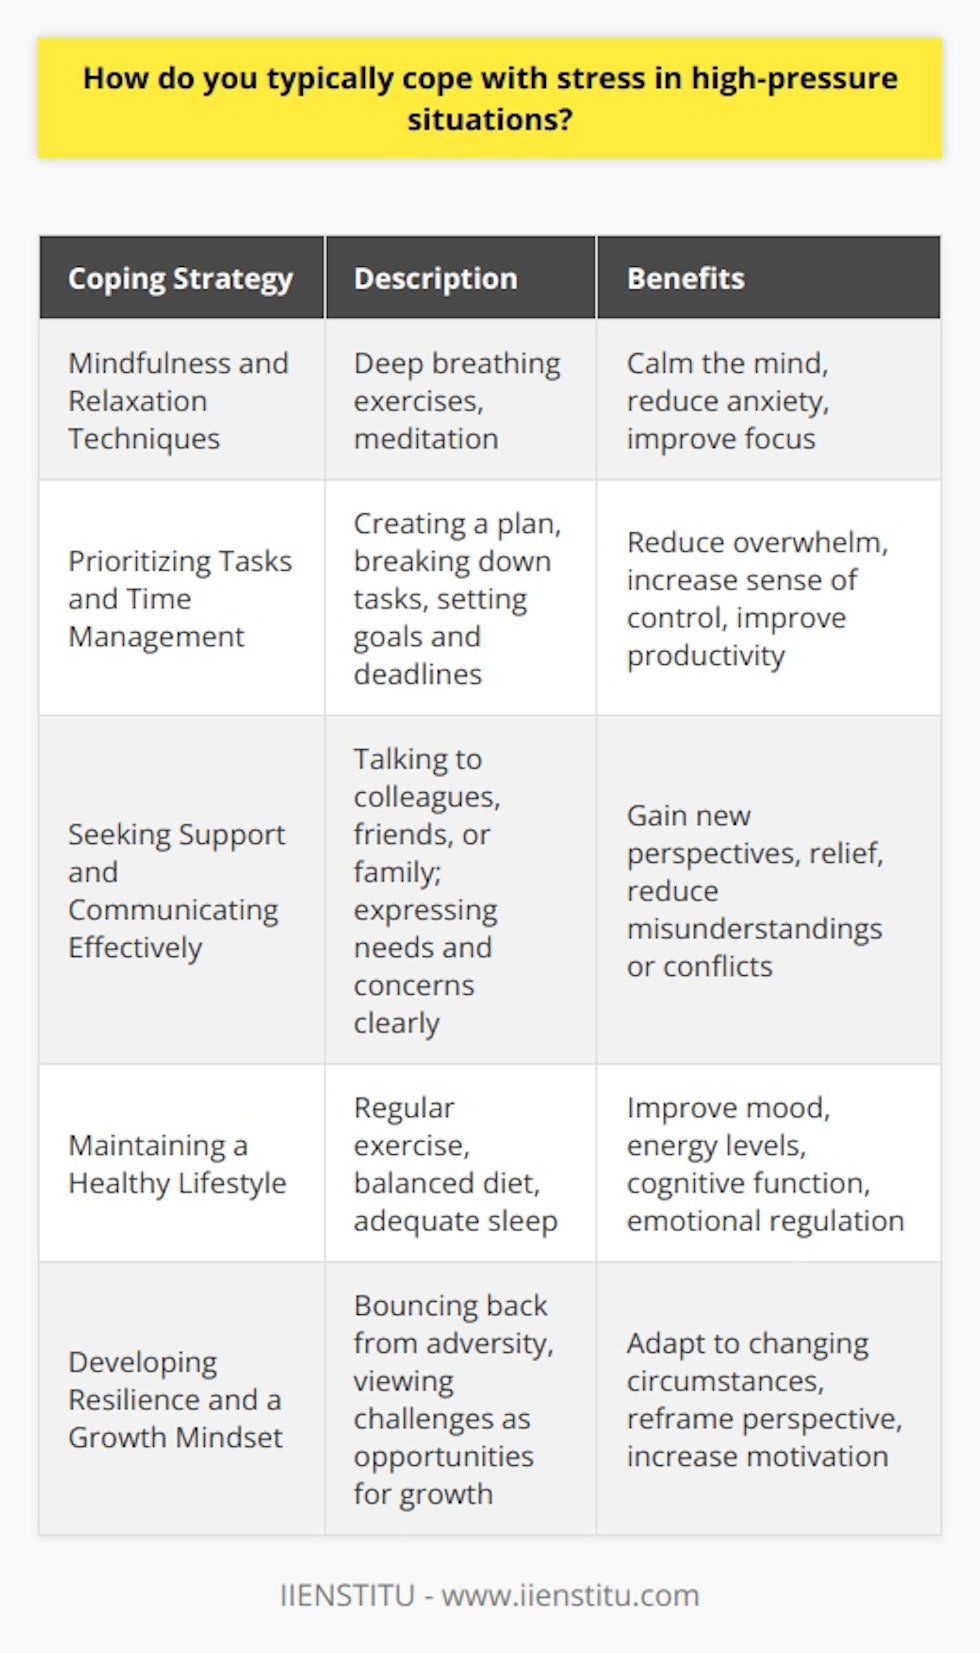 Coping with stress in high-pressure situations is a critical skill that can help individuals maintain their well-being and performance. There are various strategies that people typically employ to manage stress in demanding circumstances. One common approach is to practice mindfulness and relaxation techniques, such as deep breathing exercises or meditation. These practices can help calm the mind, reduce anxiety, and improve focus. Prioritizing Tasks and Time Management Another effective way to cope with stress in high-pressure situations is to prioritize tasks and manage time efficiently. By creating a clear plan and breaking down complex tasks into smaller, manageable steps, individuals can reduce feelings of overwhelm and increase their sense of control. Setting realistic goals and deadlines, and allocating sufficient time for each task, can also help alleviate stress and improve productivity. Seeking Support and Communicating Effectively In high-pressure situations, seeking support from others can be a valuable coping mechanism. Talking to colleagues, friends, or family members about the challenges faced can provide a sense of relief and help gain new perspectives. Effective communication is also crucial in managing stress, as it allows individuals to express their needs, concerns, and expectations clearly, reducing the likelihood of misunderstandings or conflicts. Maintaining a Healthy Lifestyle Engaging in regular physical exercise, maintaining a balanced diet, and getting enough sleep are essential for managing stress in high-pressure situations. Exercise helps release endorphins, which can improve mood and reduce stress levels. A nutritious diet provides the body with the necessary energy and nutrients to cope with demanding circumstances. Adequate sleep is crucial for cognitive function, emotional regulation, and overall well-being. Developing Resilience and a Growth Mindset Cultivating resilience and adopting a growth mindset can significantly help individuals cope with stress in high-pressure situations. Resilience refers to the ability to bounce back from adversity and adapt to changing circumstances. By viewing challenges as opportunities for growth and learning, individuals can reframe their perspective and approach high-pressure situations with a more positive outlook. Embracing a growth mindset, which emphasizes the belief that skills and abilities can be developed through effort and dedication, can also help reduce stress and increase motivation. In conclusion, coping with stress in high-pressure situations involves a combination of strategies, including mindfulness and relaxation techniques, prioritizing tasks and time management, seeking support and communicating effectively, maintaining a healthy lifestyle, and developing resilience and a growth mindset. By employing these approaches, individuals can better navigate demanding circumstances, maintain their well-being, and achieve their goals.